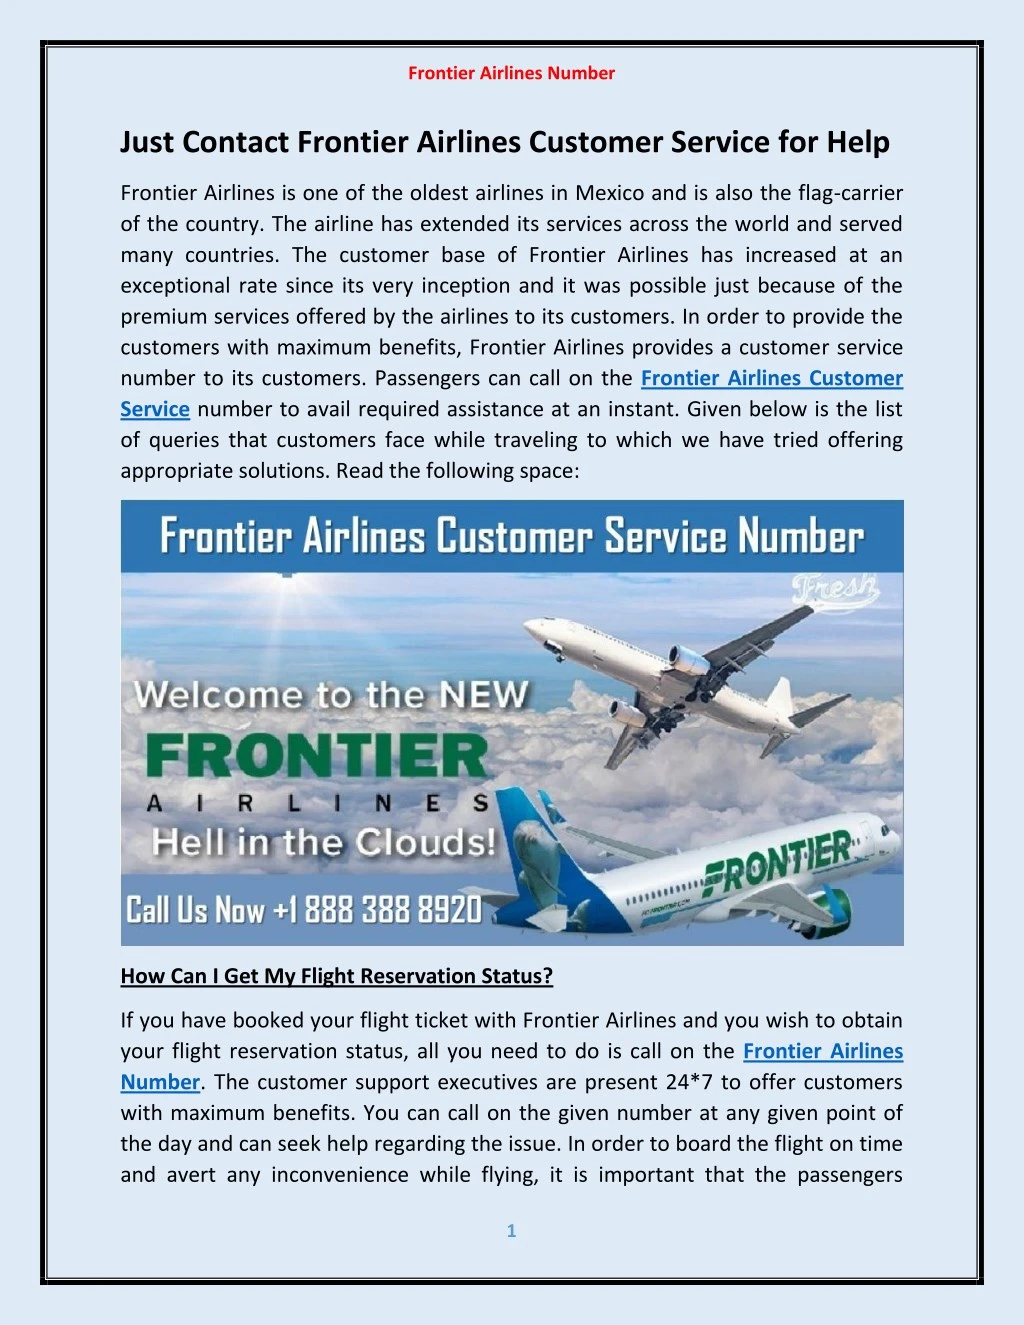 frontier airlines number